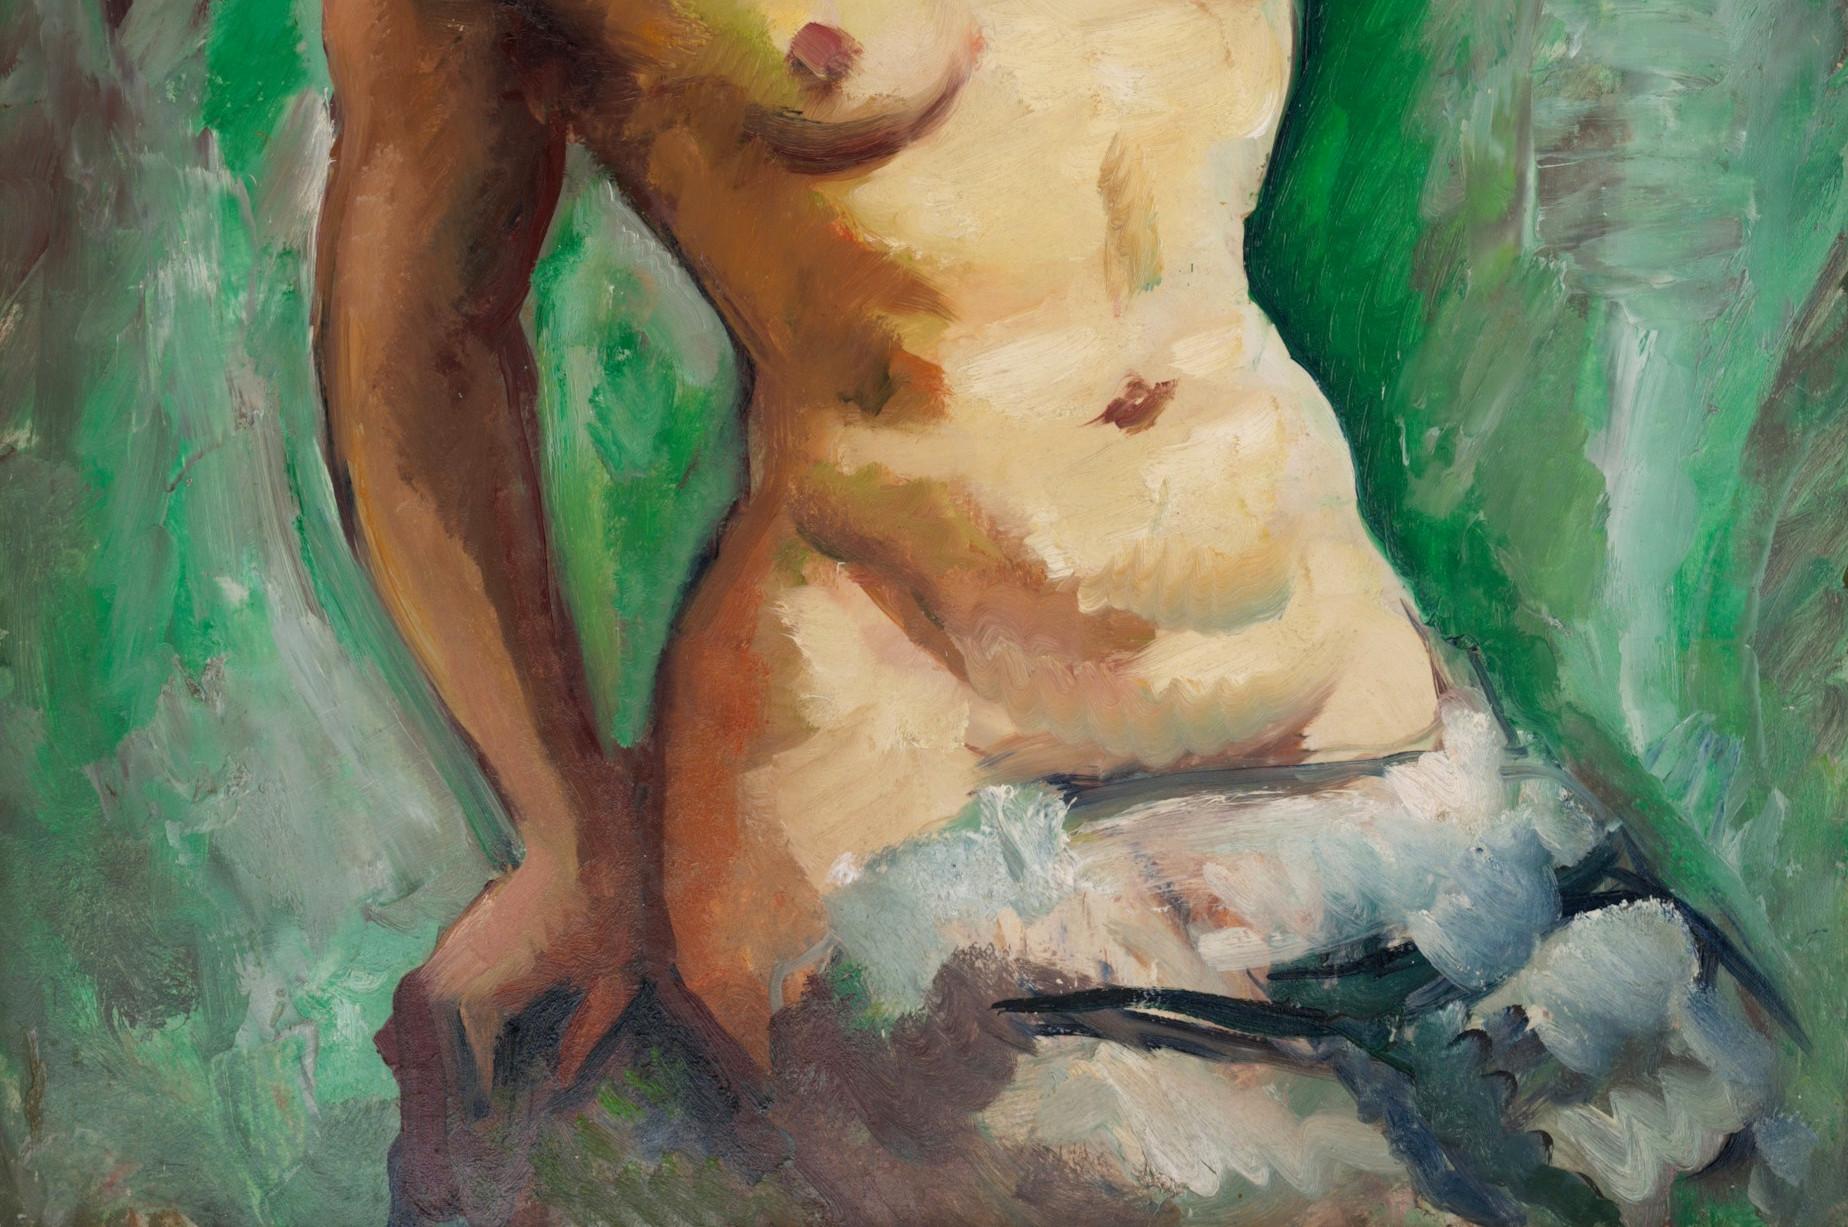 Charles PICART LE DOUX, Model on Green Background, Oil on Isorel, 1949 - Brown Portrait Painting by Charles Picart le Doux